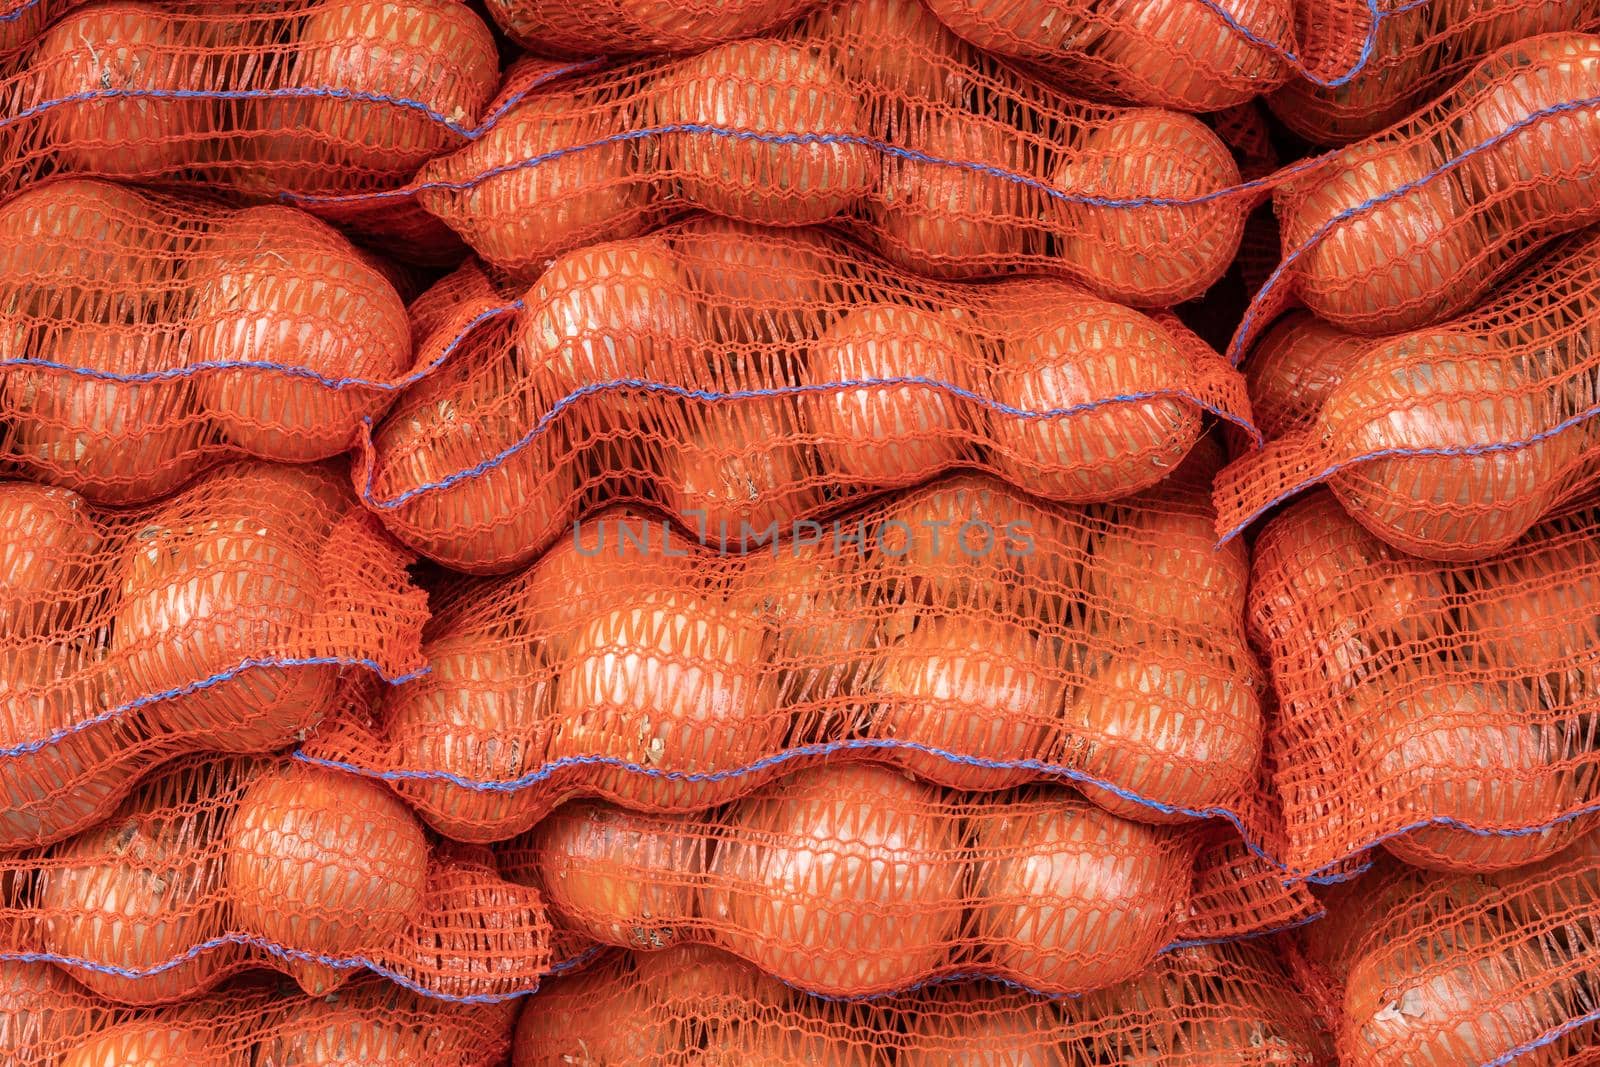 Abstract Background Texture Of Sacks Of Onions At A Market